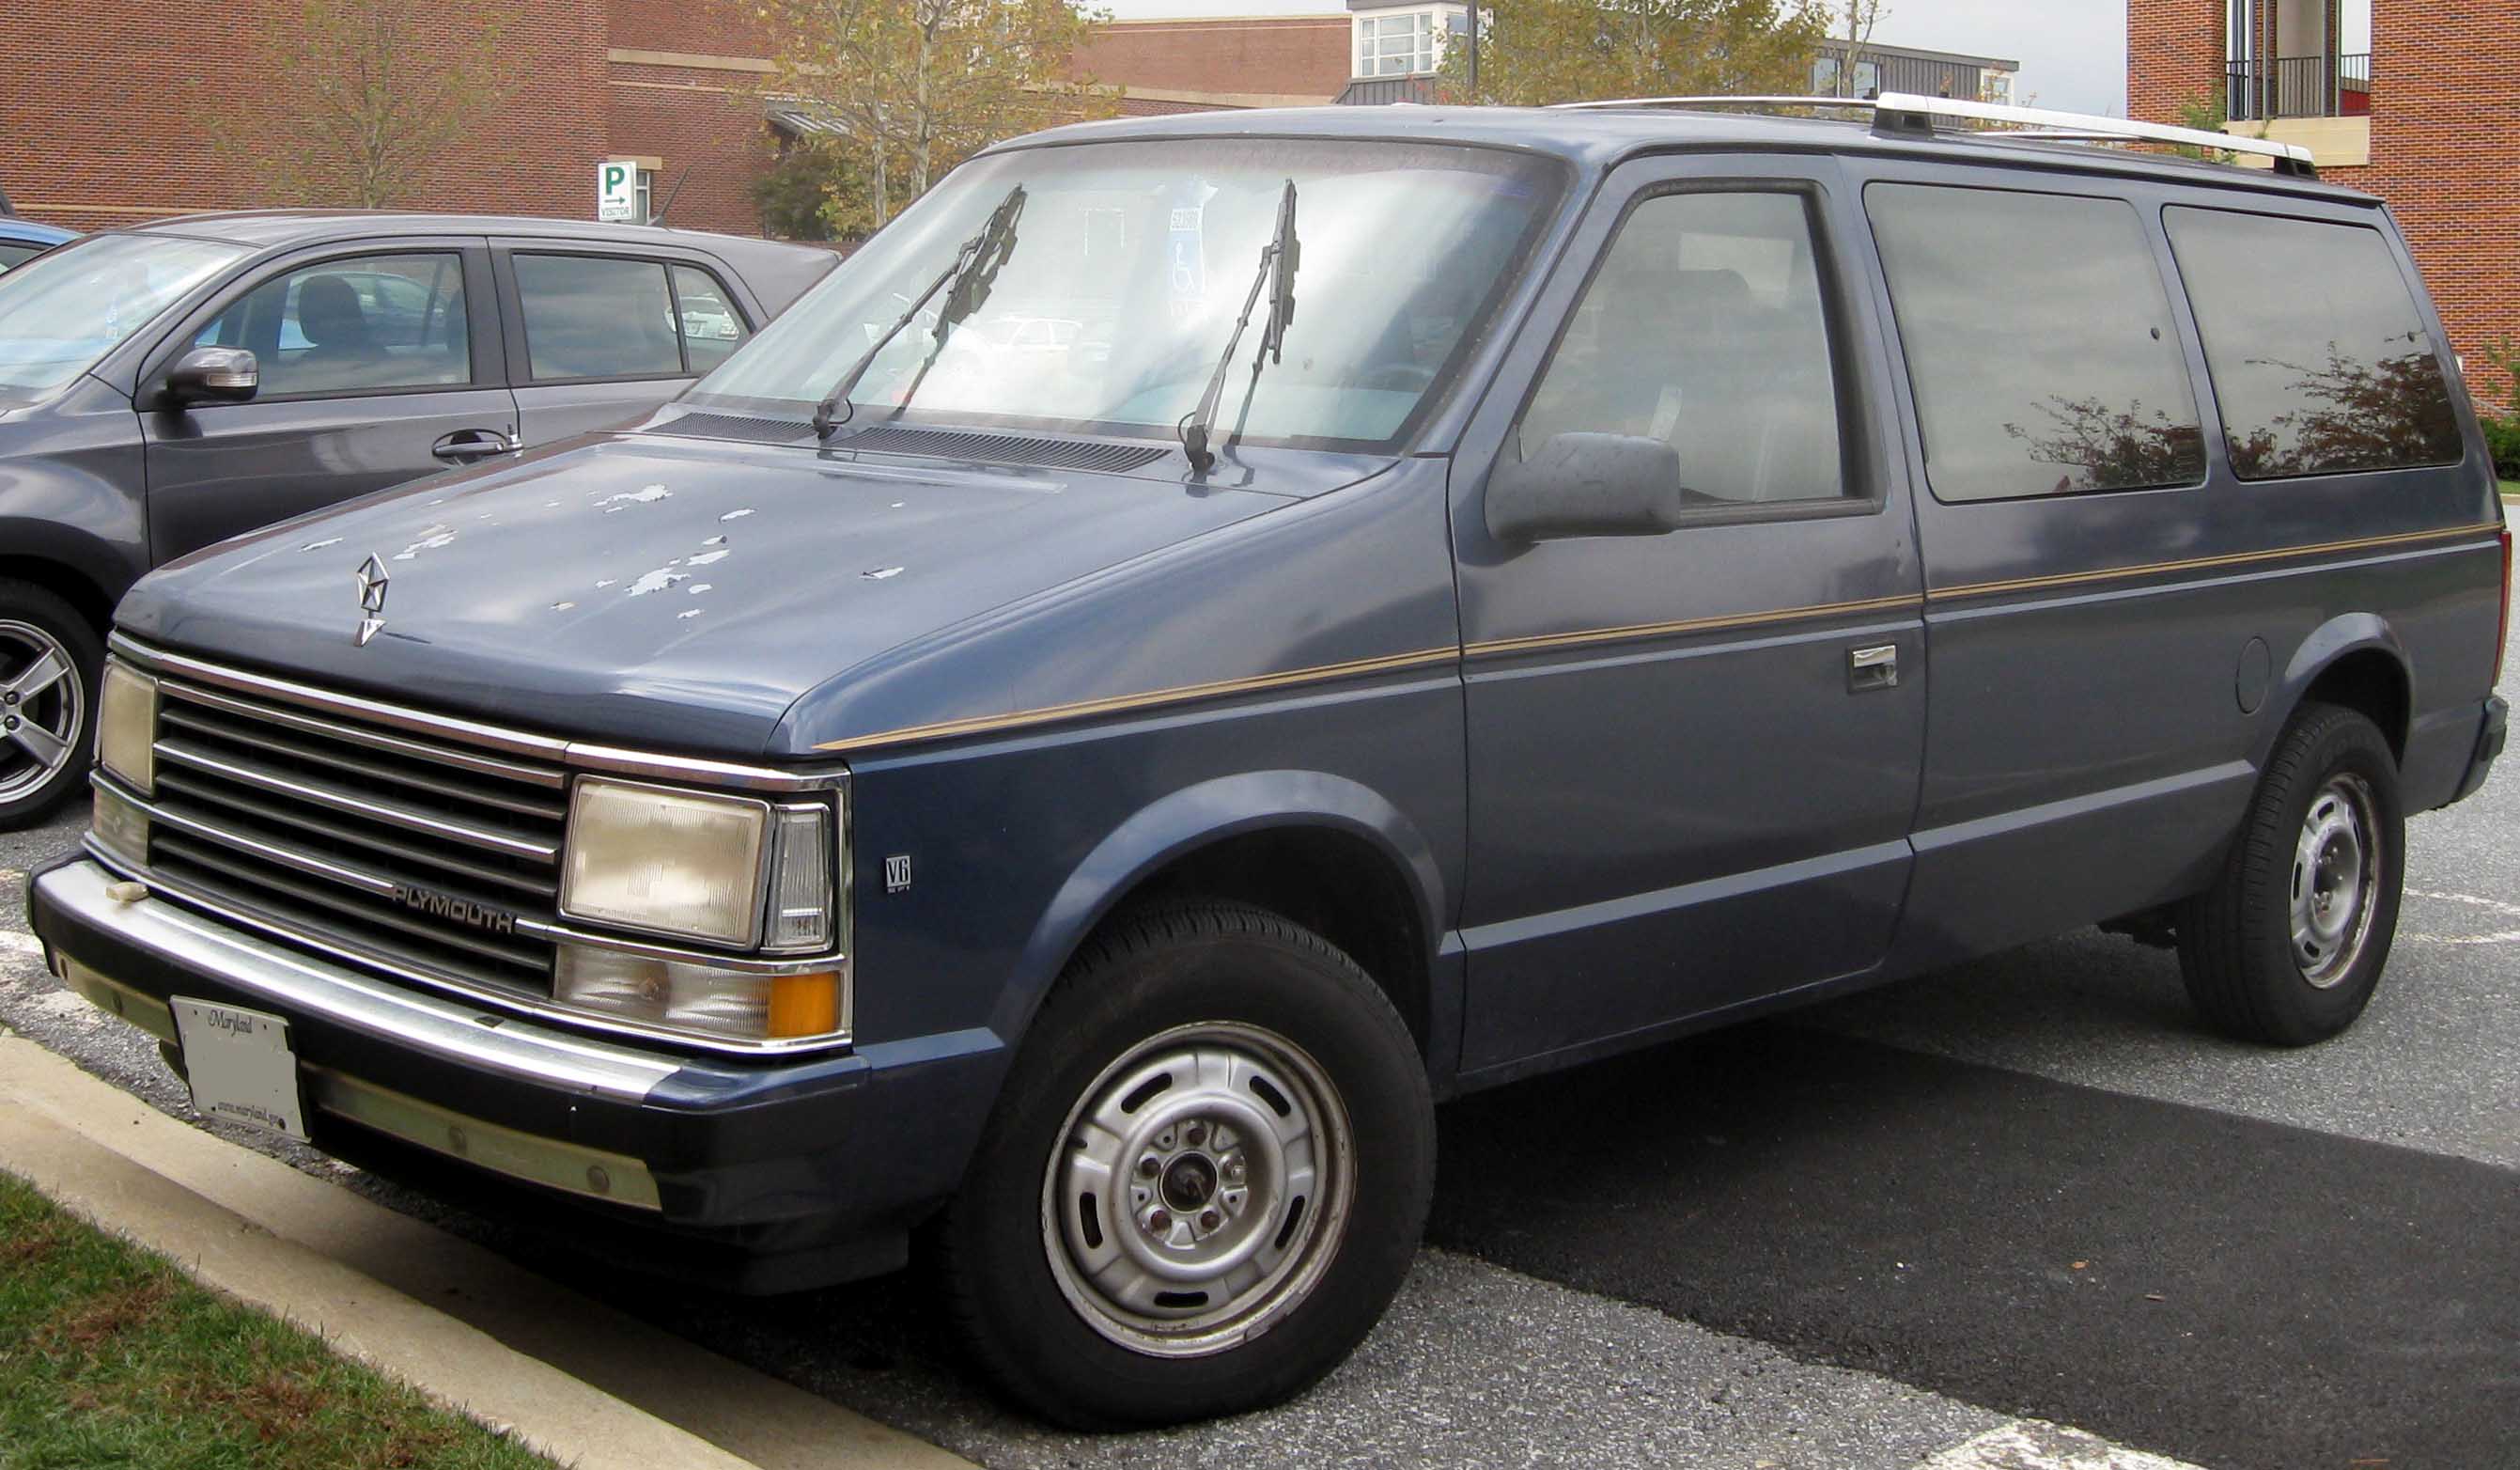 File:87-90 Plymouth Grand Voyager SE.jpg - Wikimedia Commons